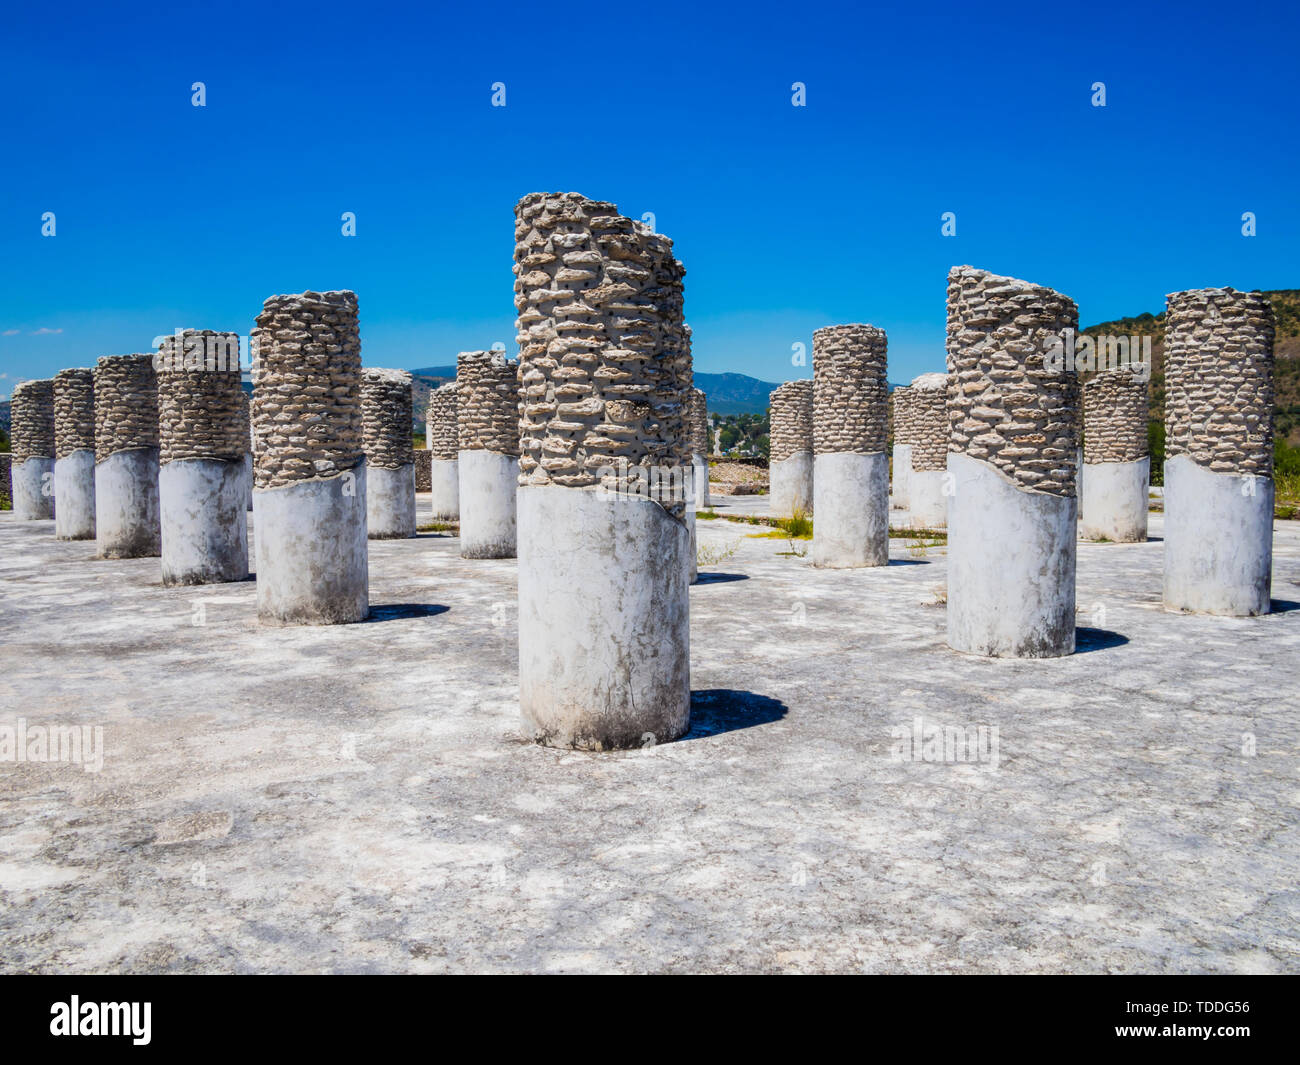 Perspective view of the ruins of the Burnt Palace in Tula archaeological site, Mexico Stock Photo